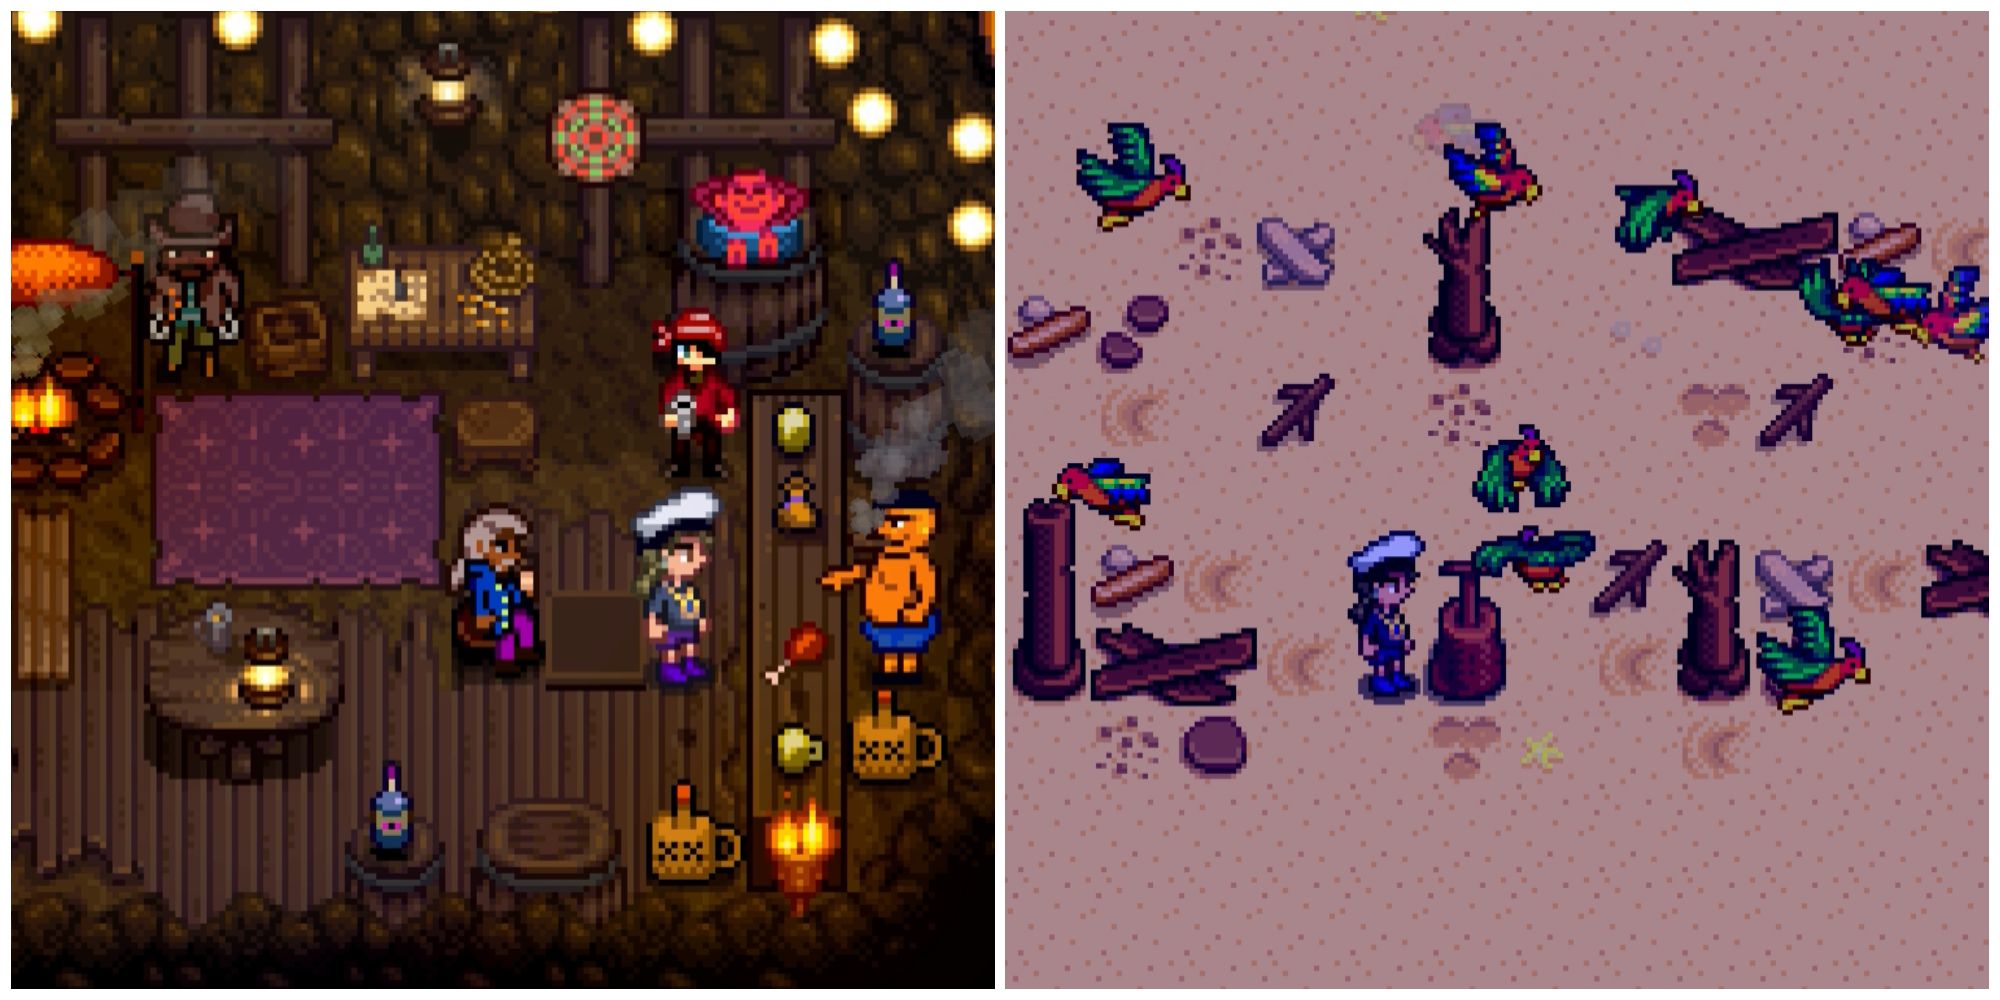 Split image of the Pirate Cove and some parrots fixing up the Island Resort to unlock the Pirate Cove in Stardew Valley